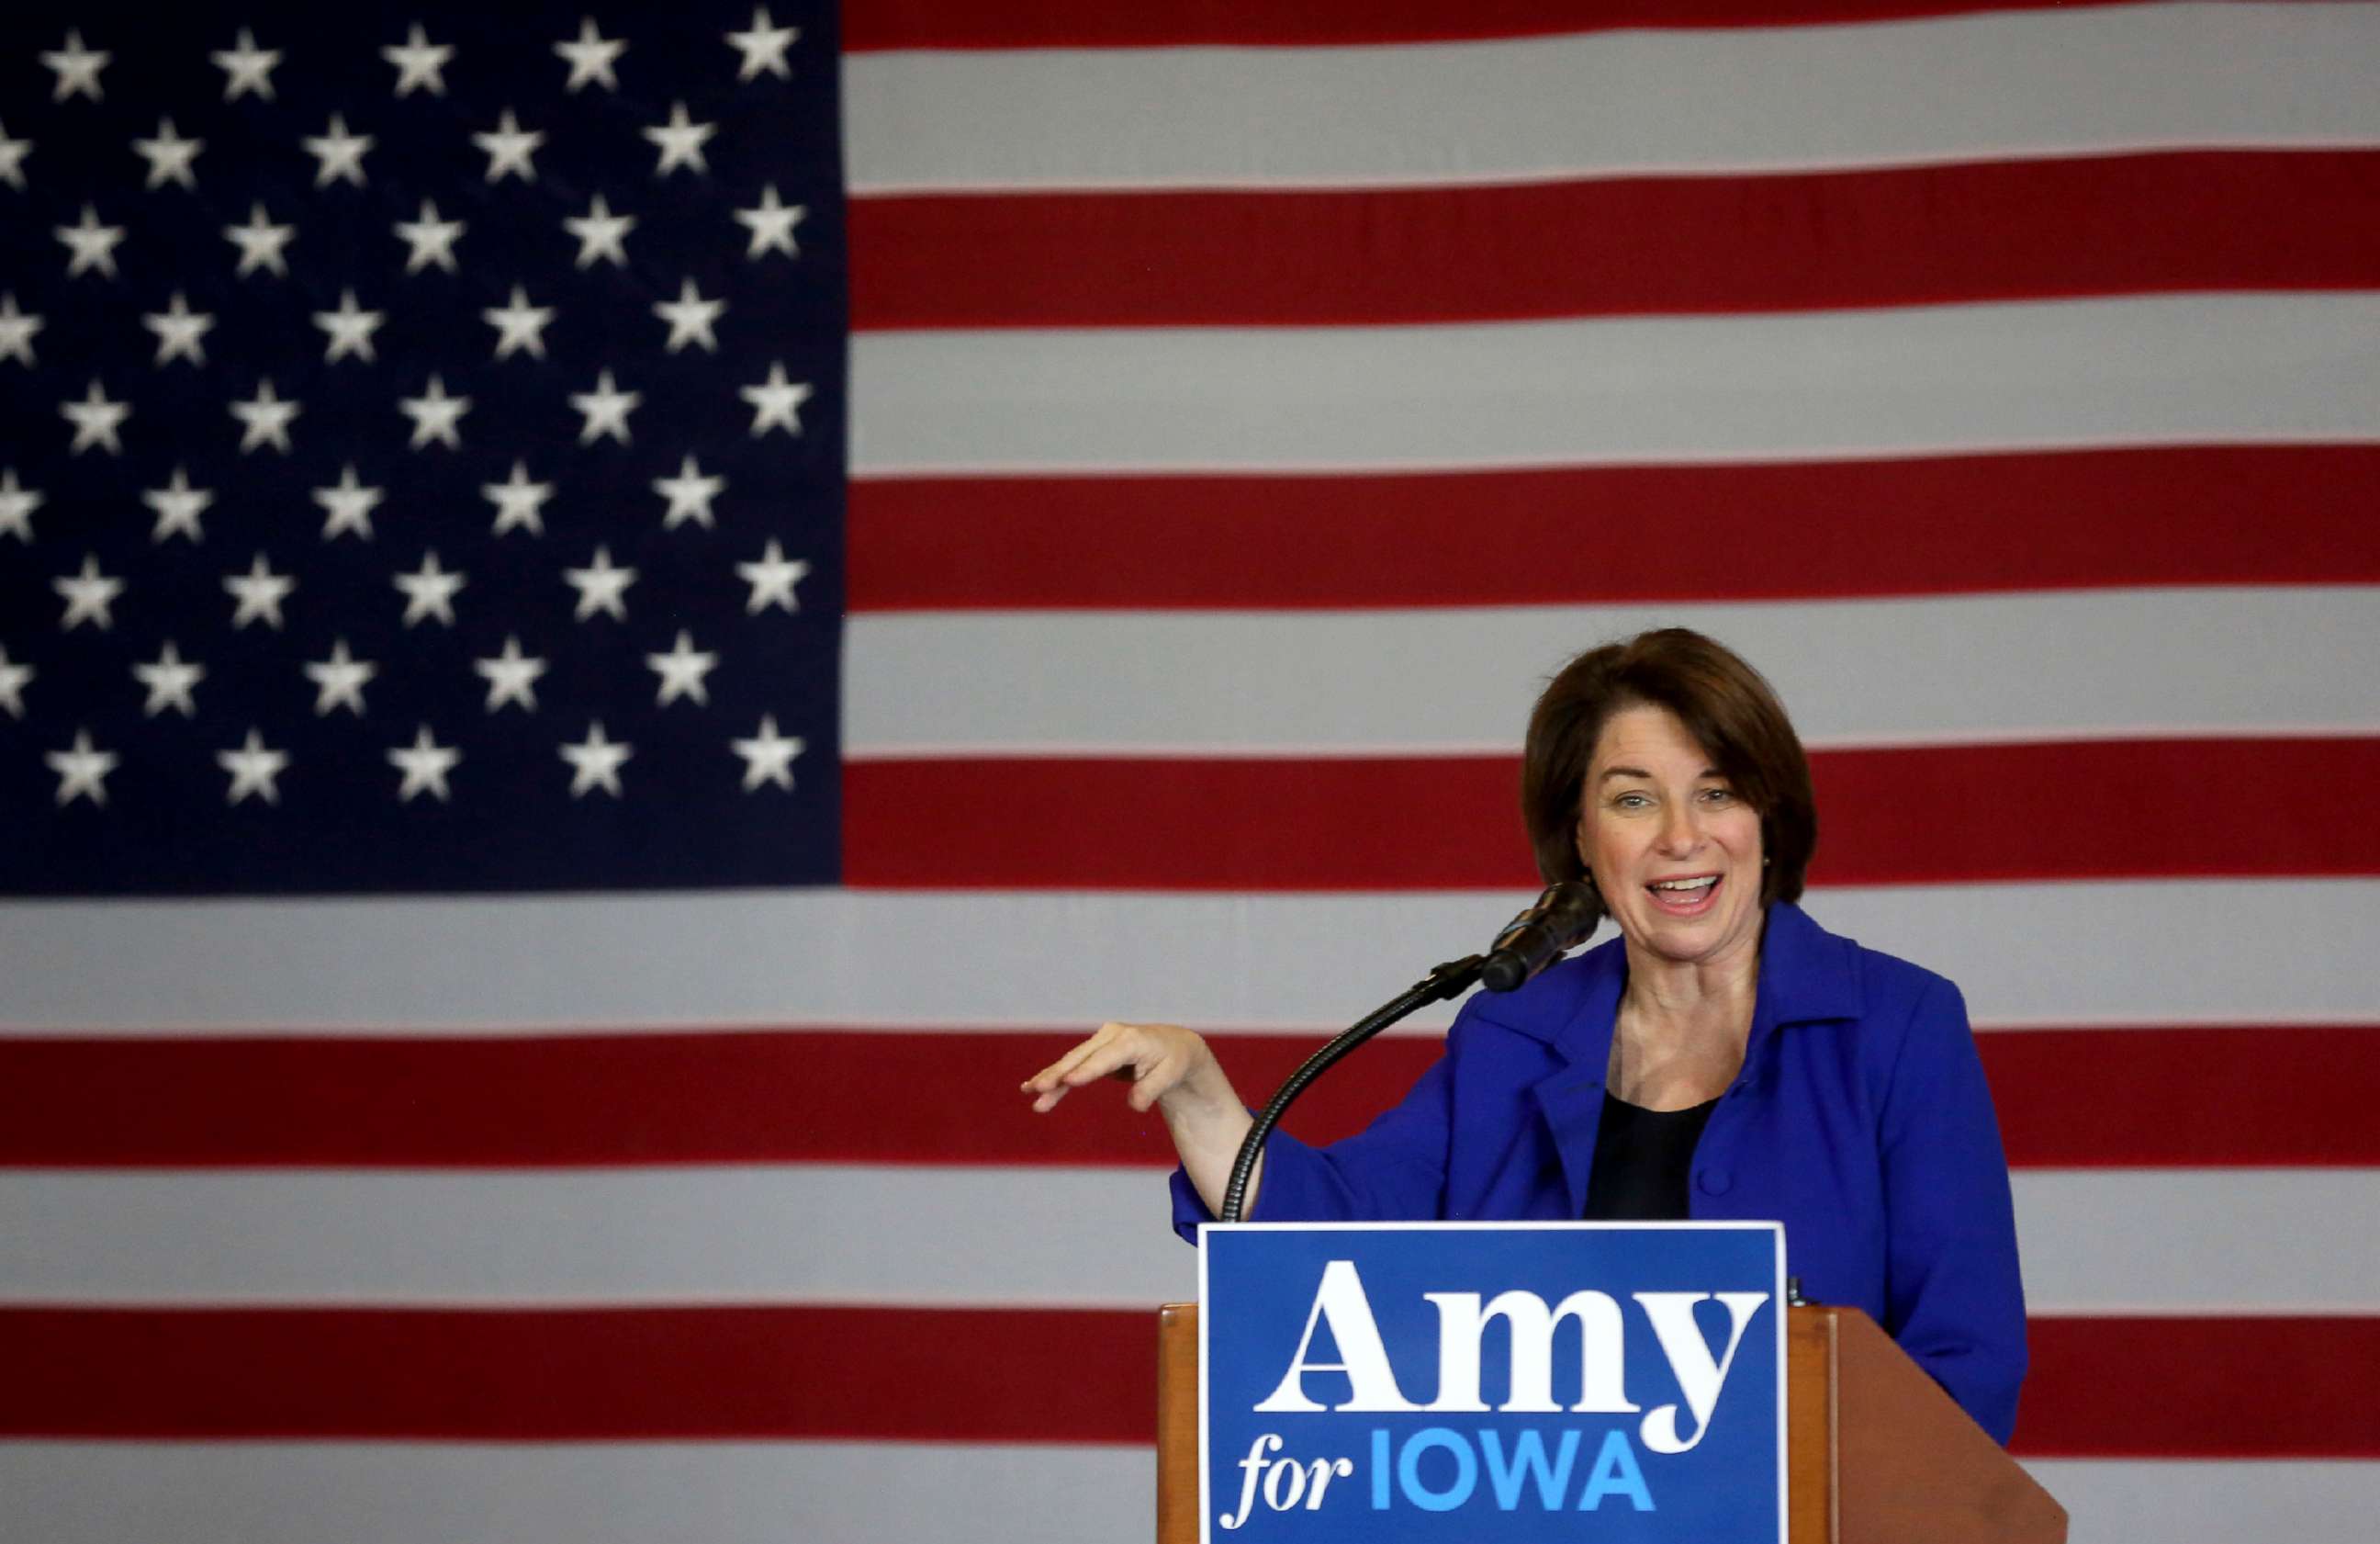 PHOTO: Democratic presidential candidate Sen. Amy Klobuchar, speaks during an event at Grand River Center in Dubuque, Iowa, Dec. 7, 2019.